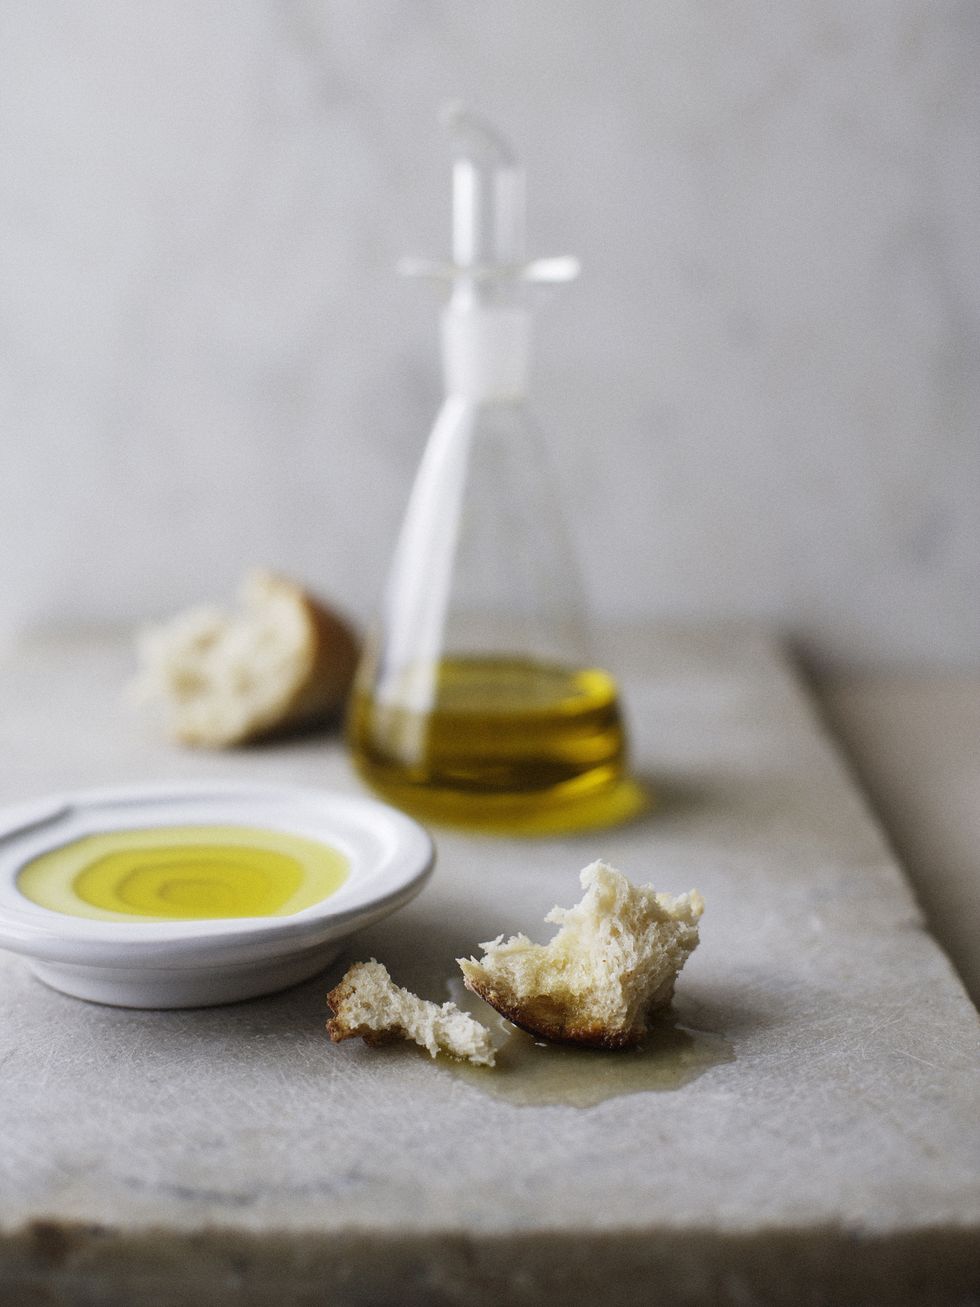 Plate of olive oil with crusty bread